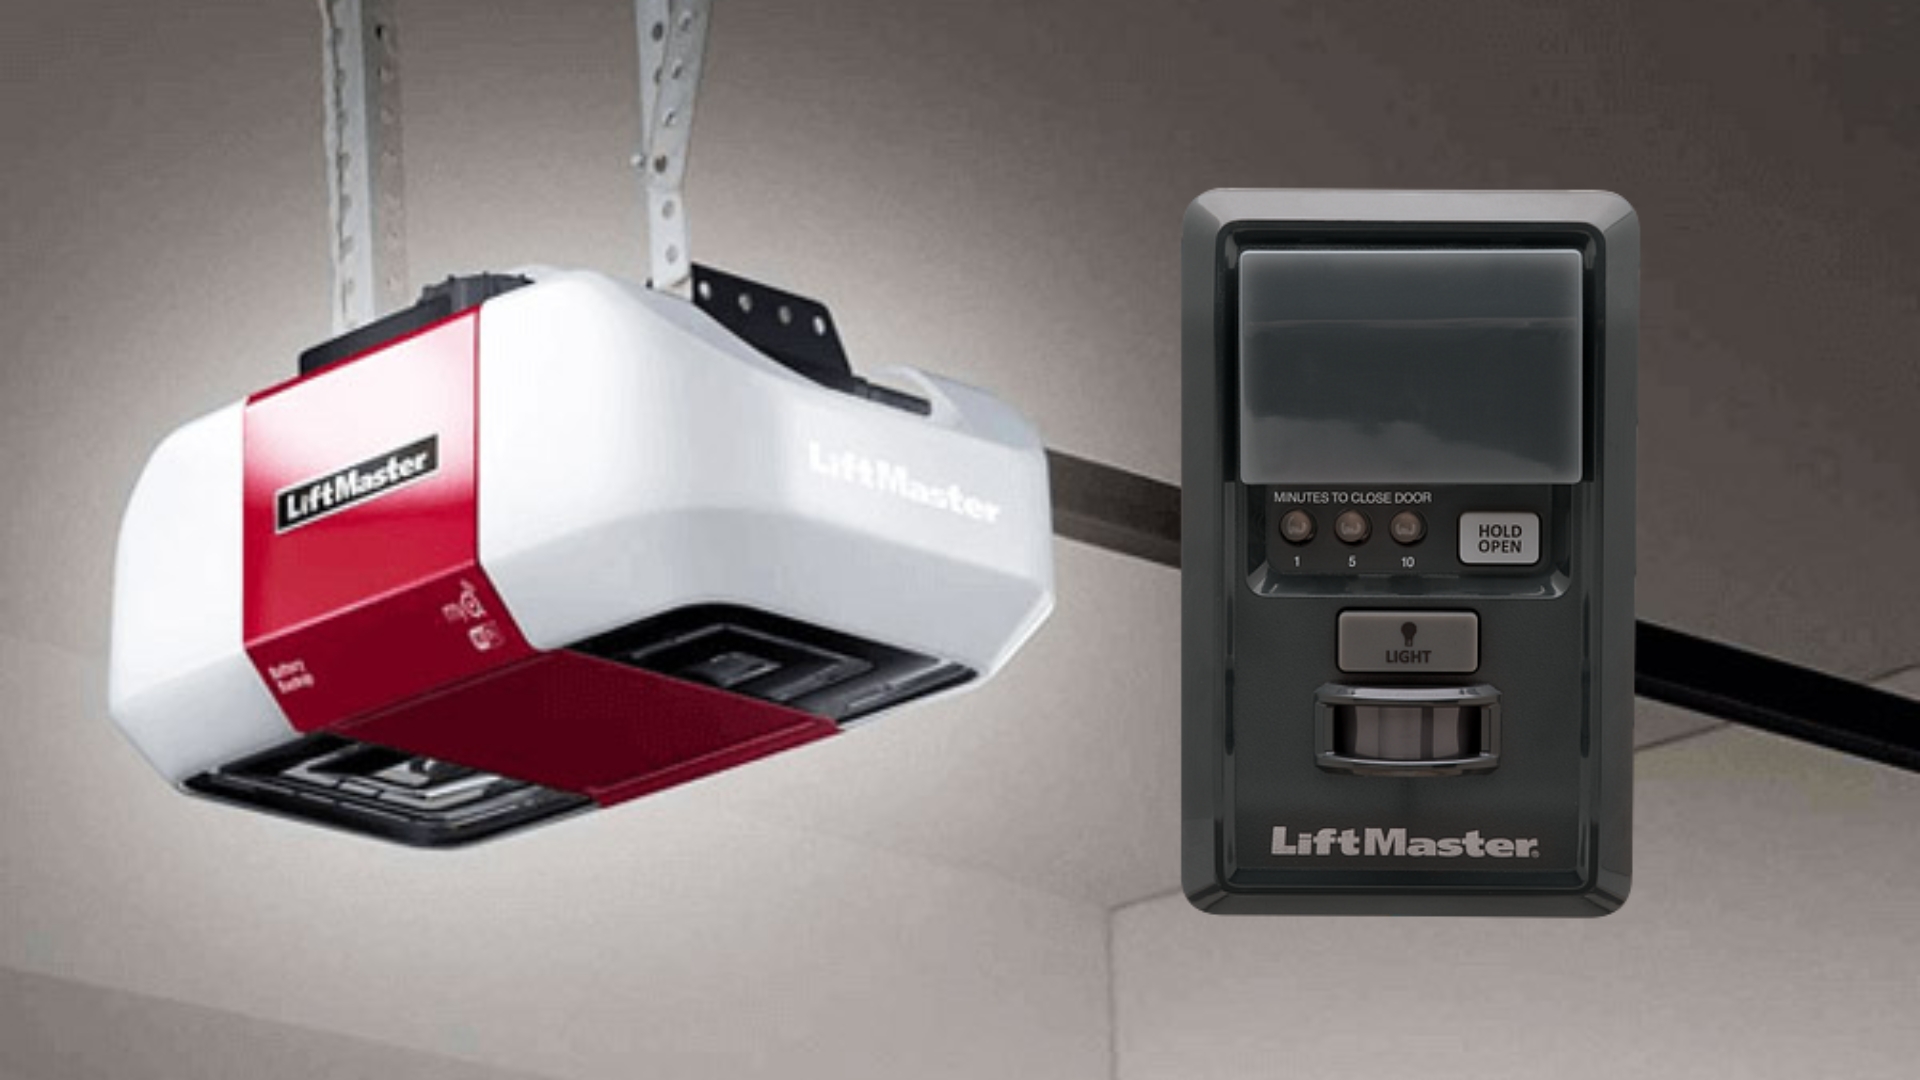 A LiftMaster opener and wall switch